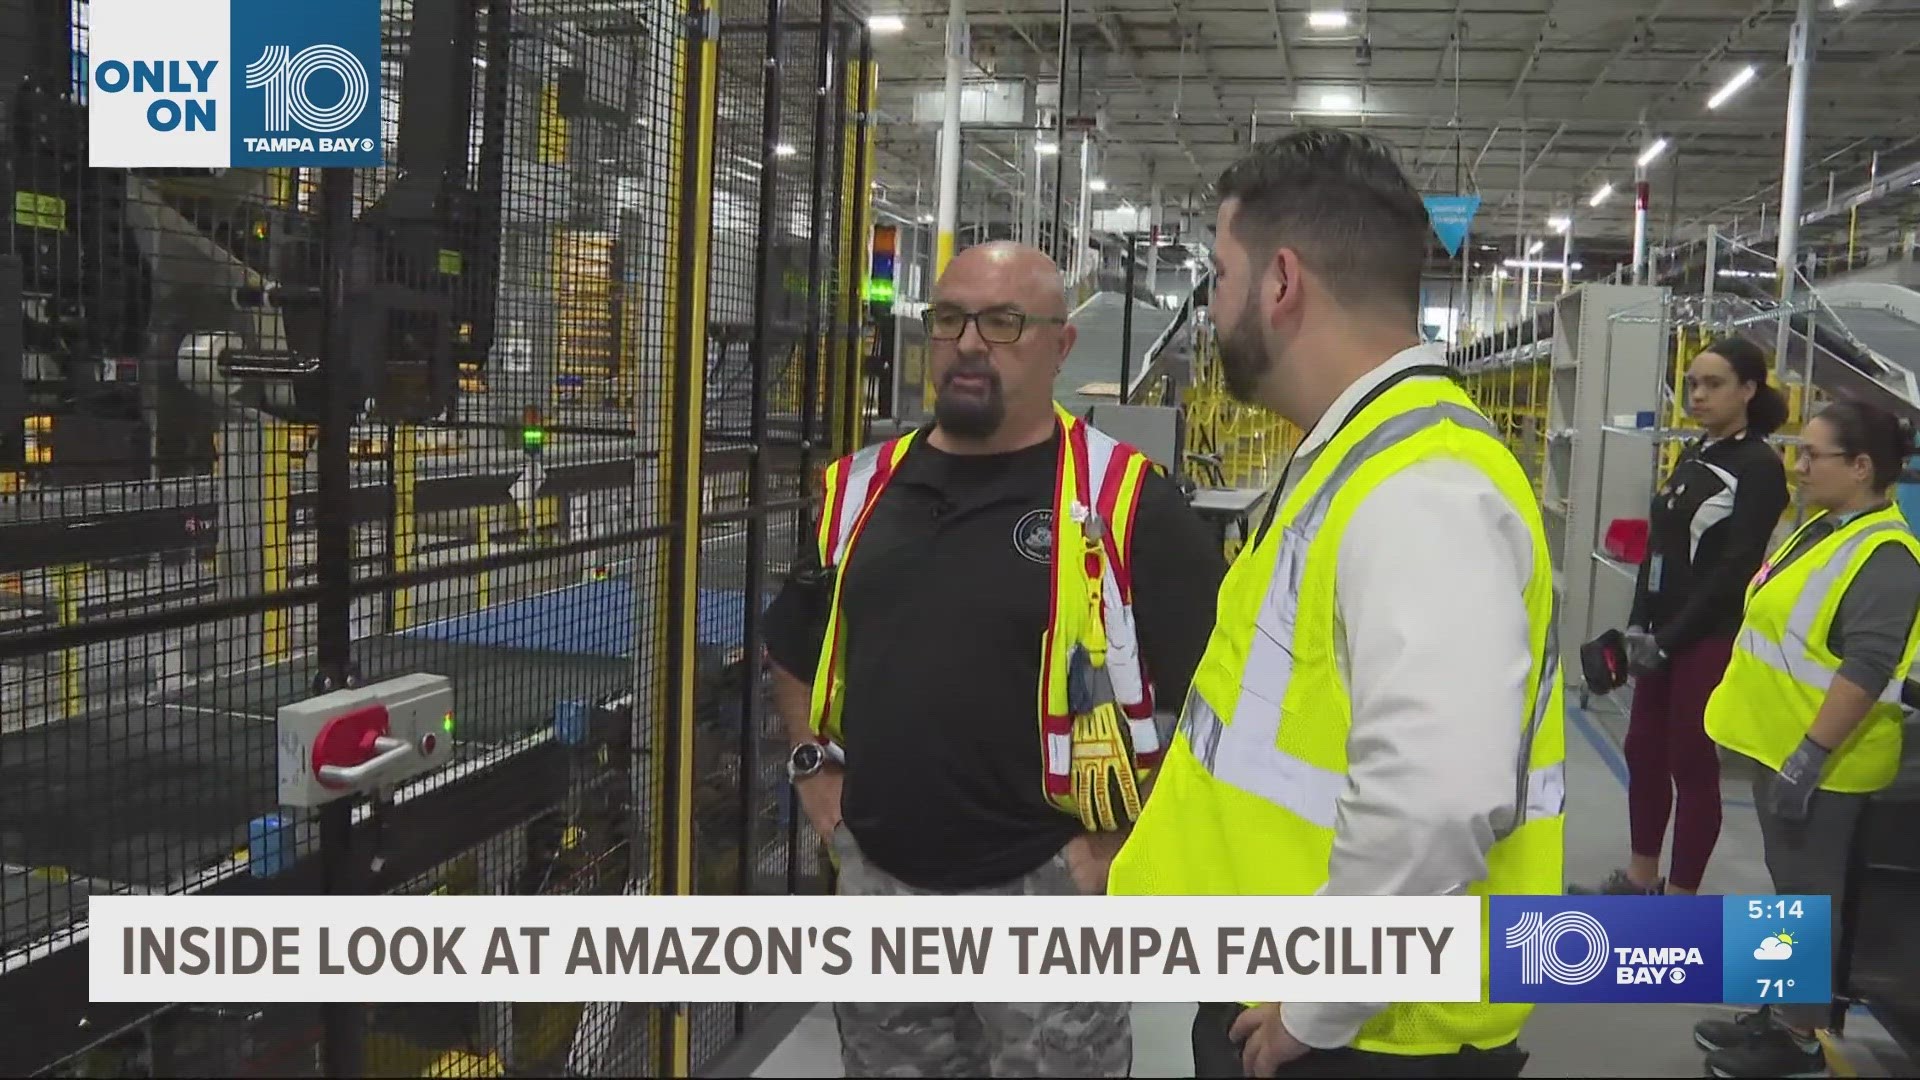 10 Tampa Bay got an inside look at the high-tech facility helping make same-day deliveries happen in the Tampa Bay area.